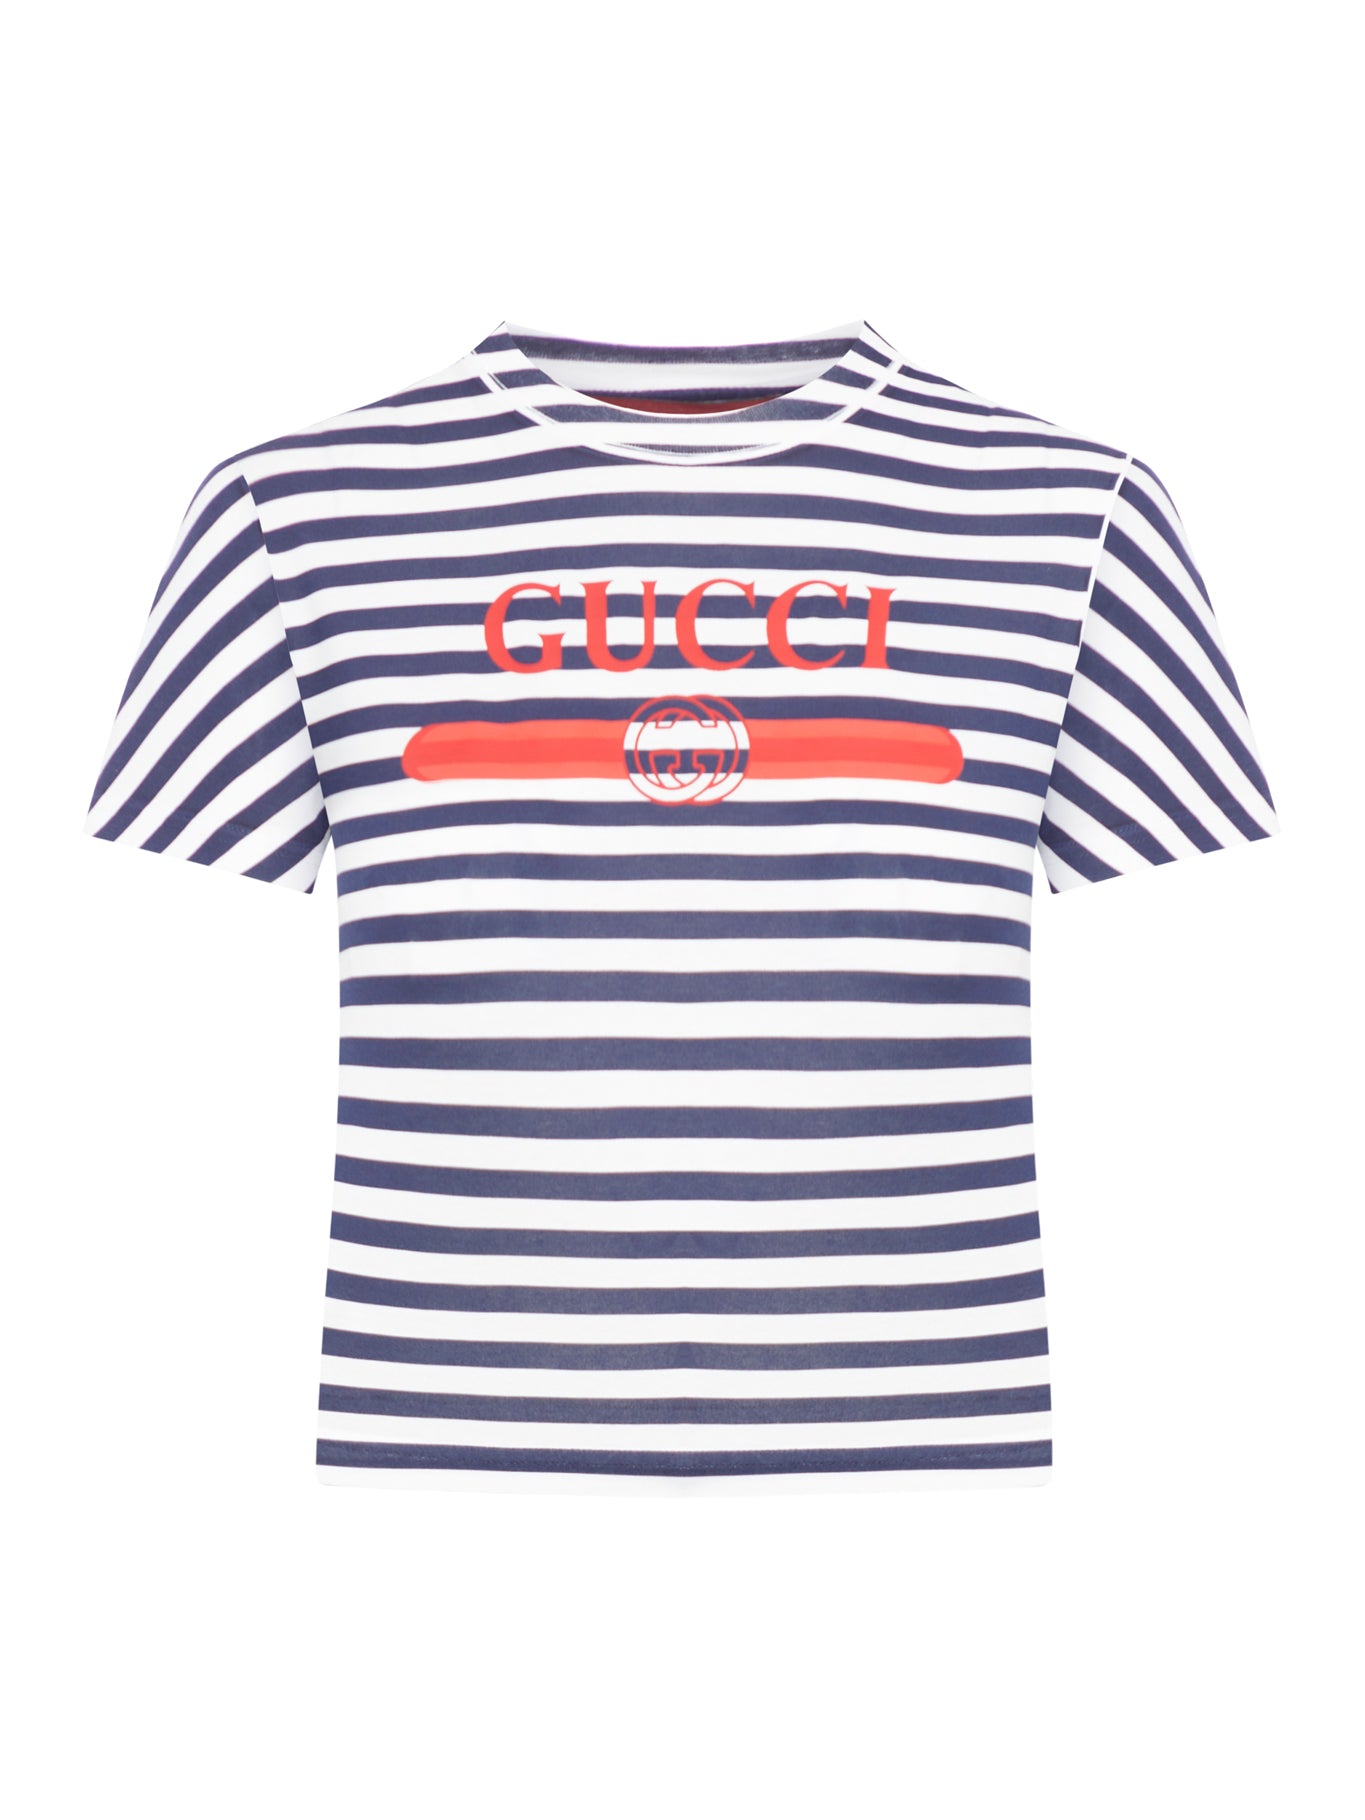 STRIPED COTTON JERSEY T-SHIRT WITH GUCCI PRINT